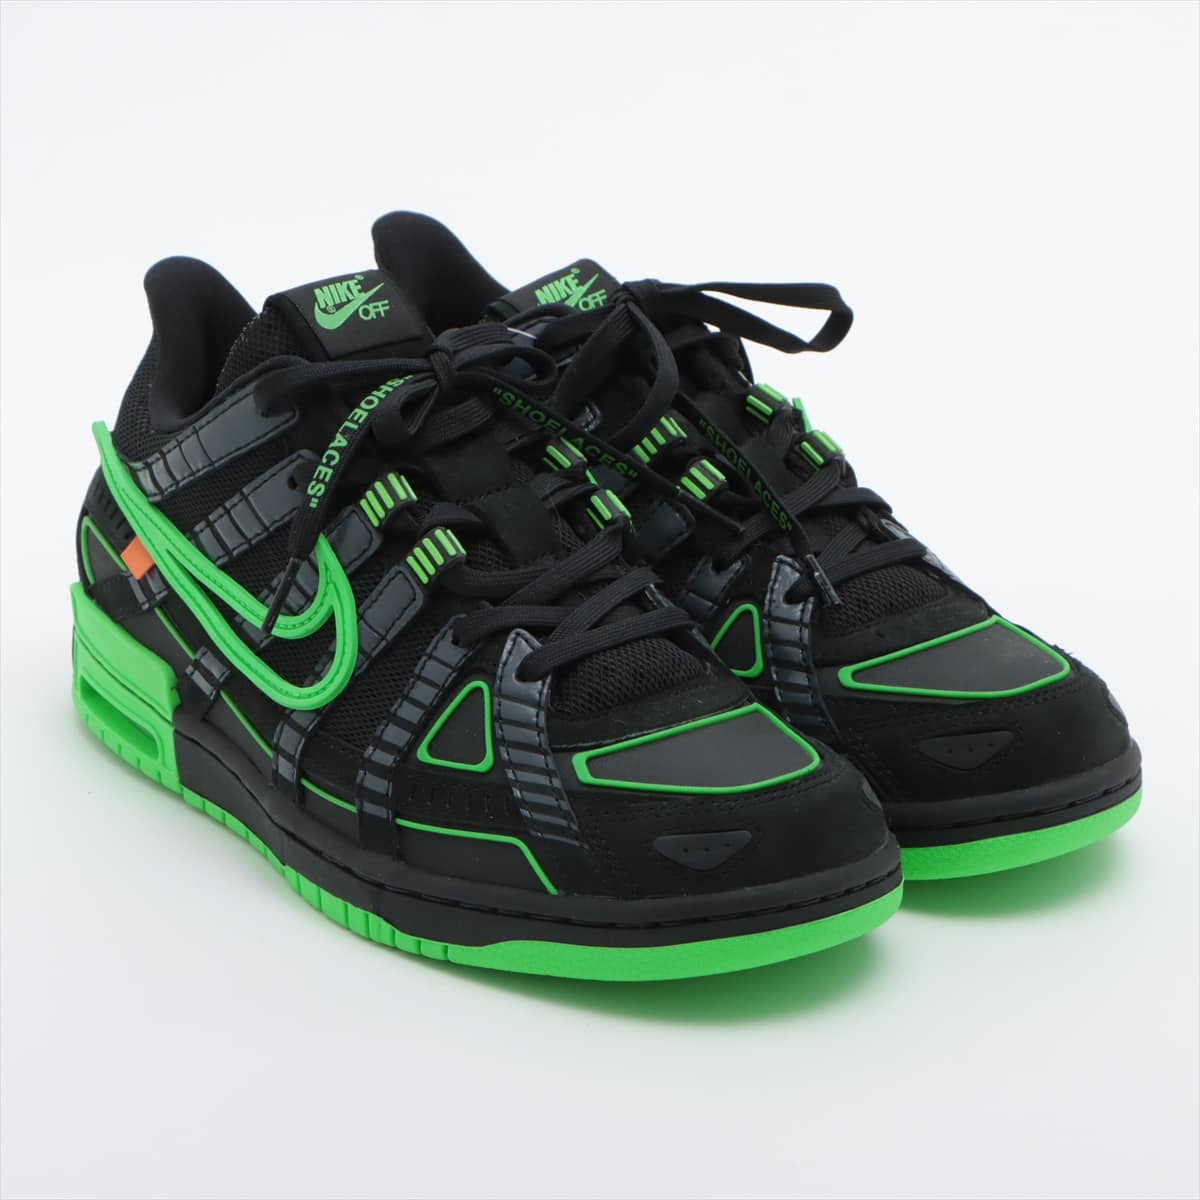 NIKE × OFF-WHITE Leather x fabric Sneakers 8 Men's Green x black CU6015-001 Air Rubber Dunk Green Strike